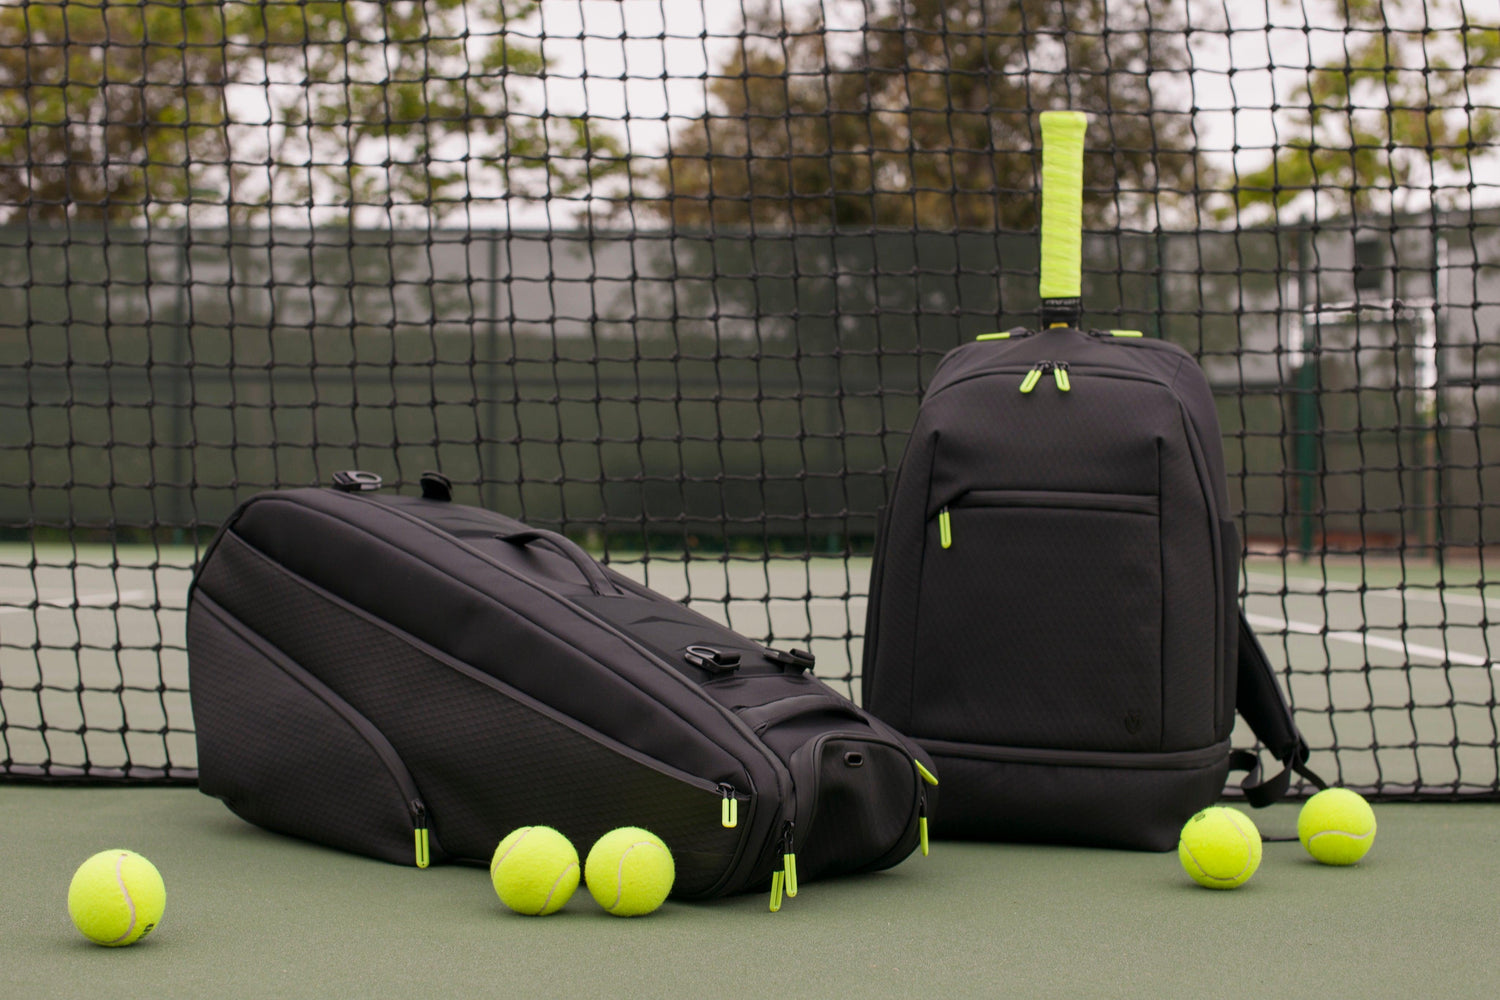 Tennis Bag Buying Guide for Any Player